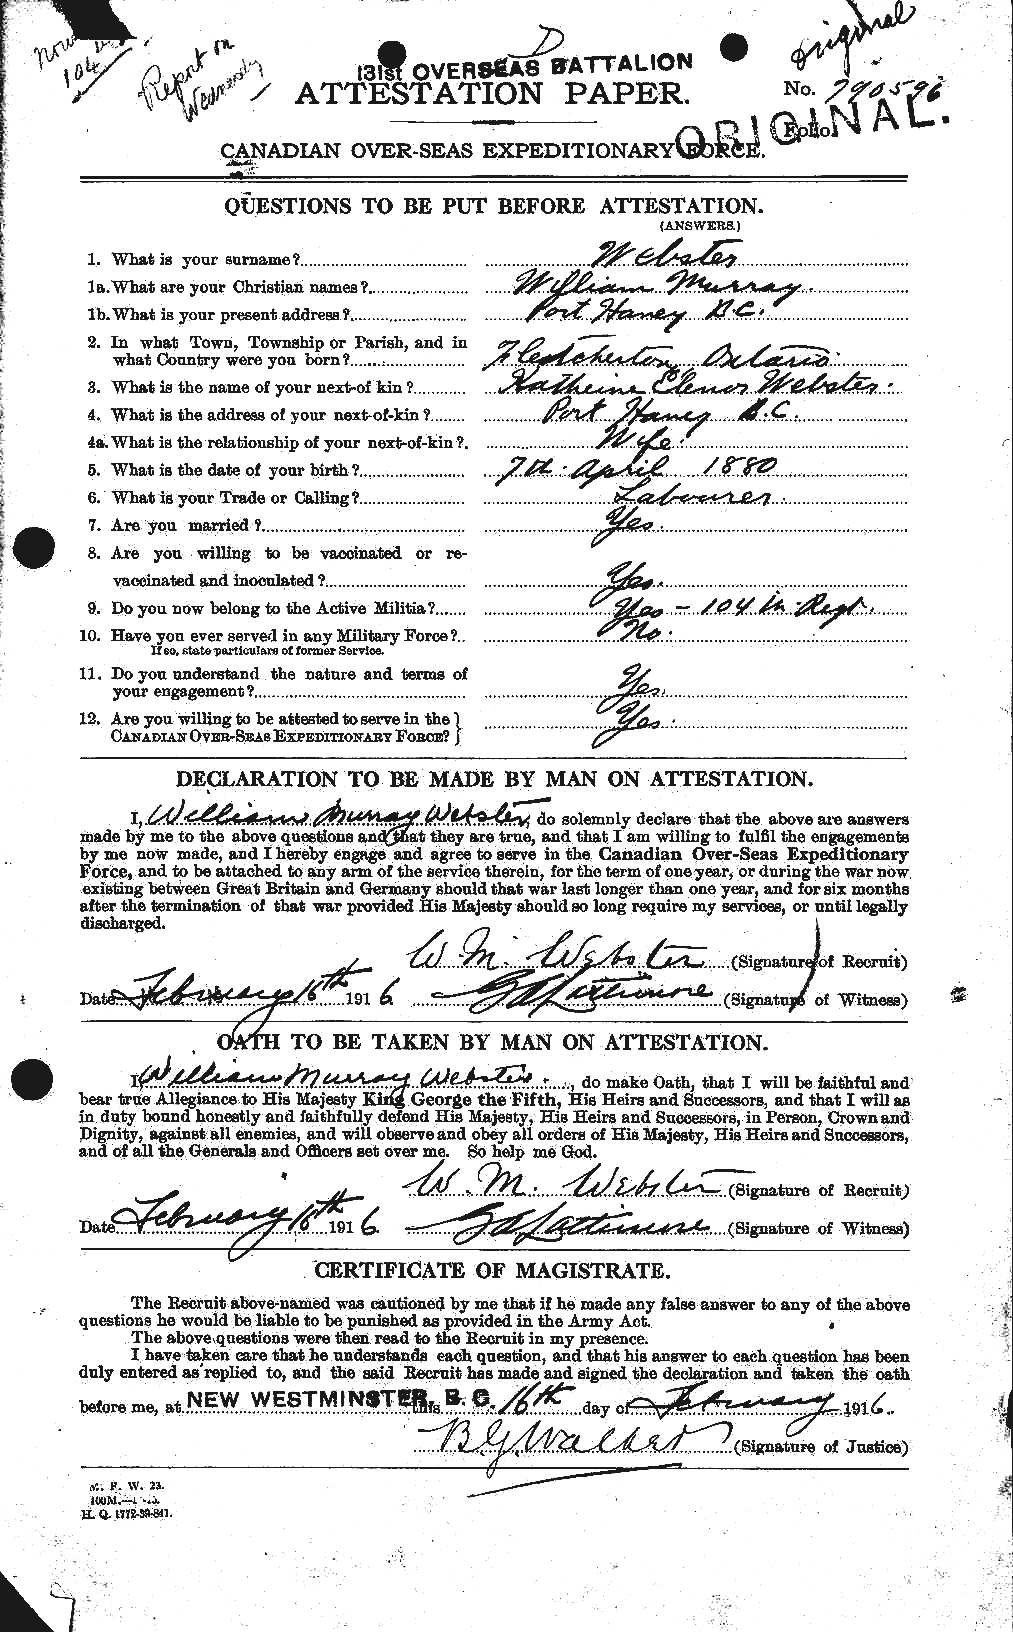 Personnel Records of the First World War - CEF 662034a